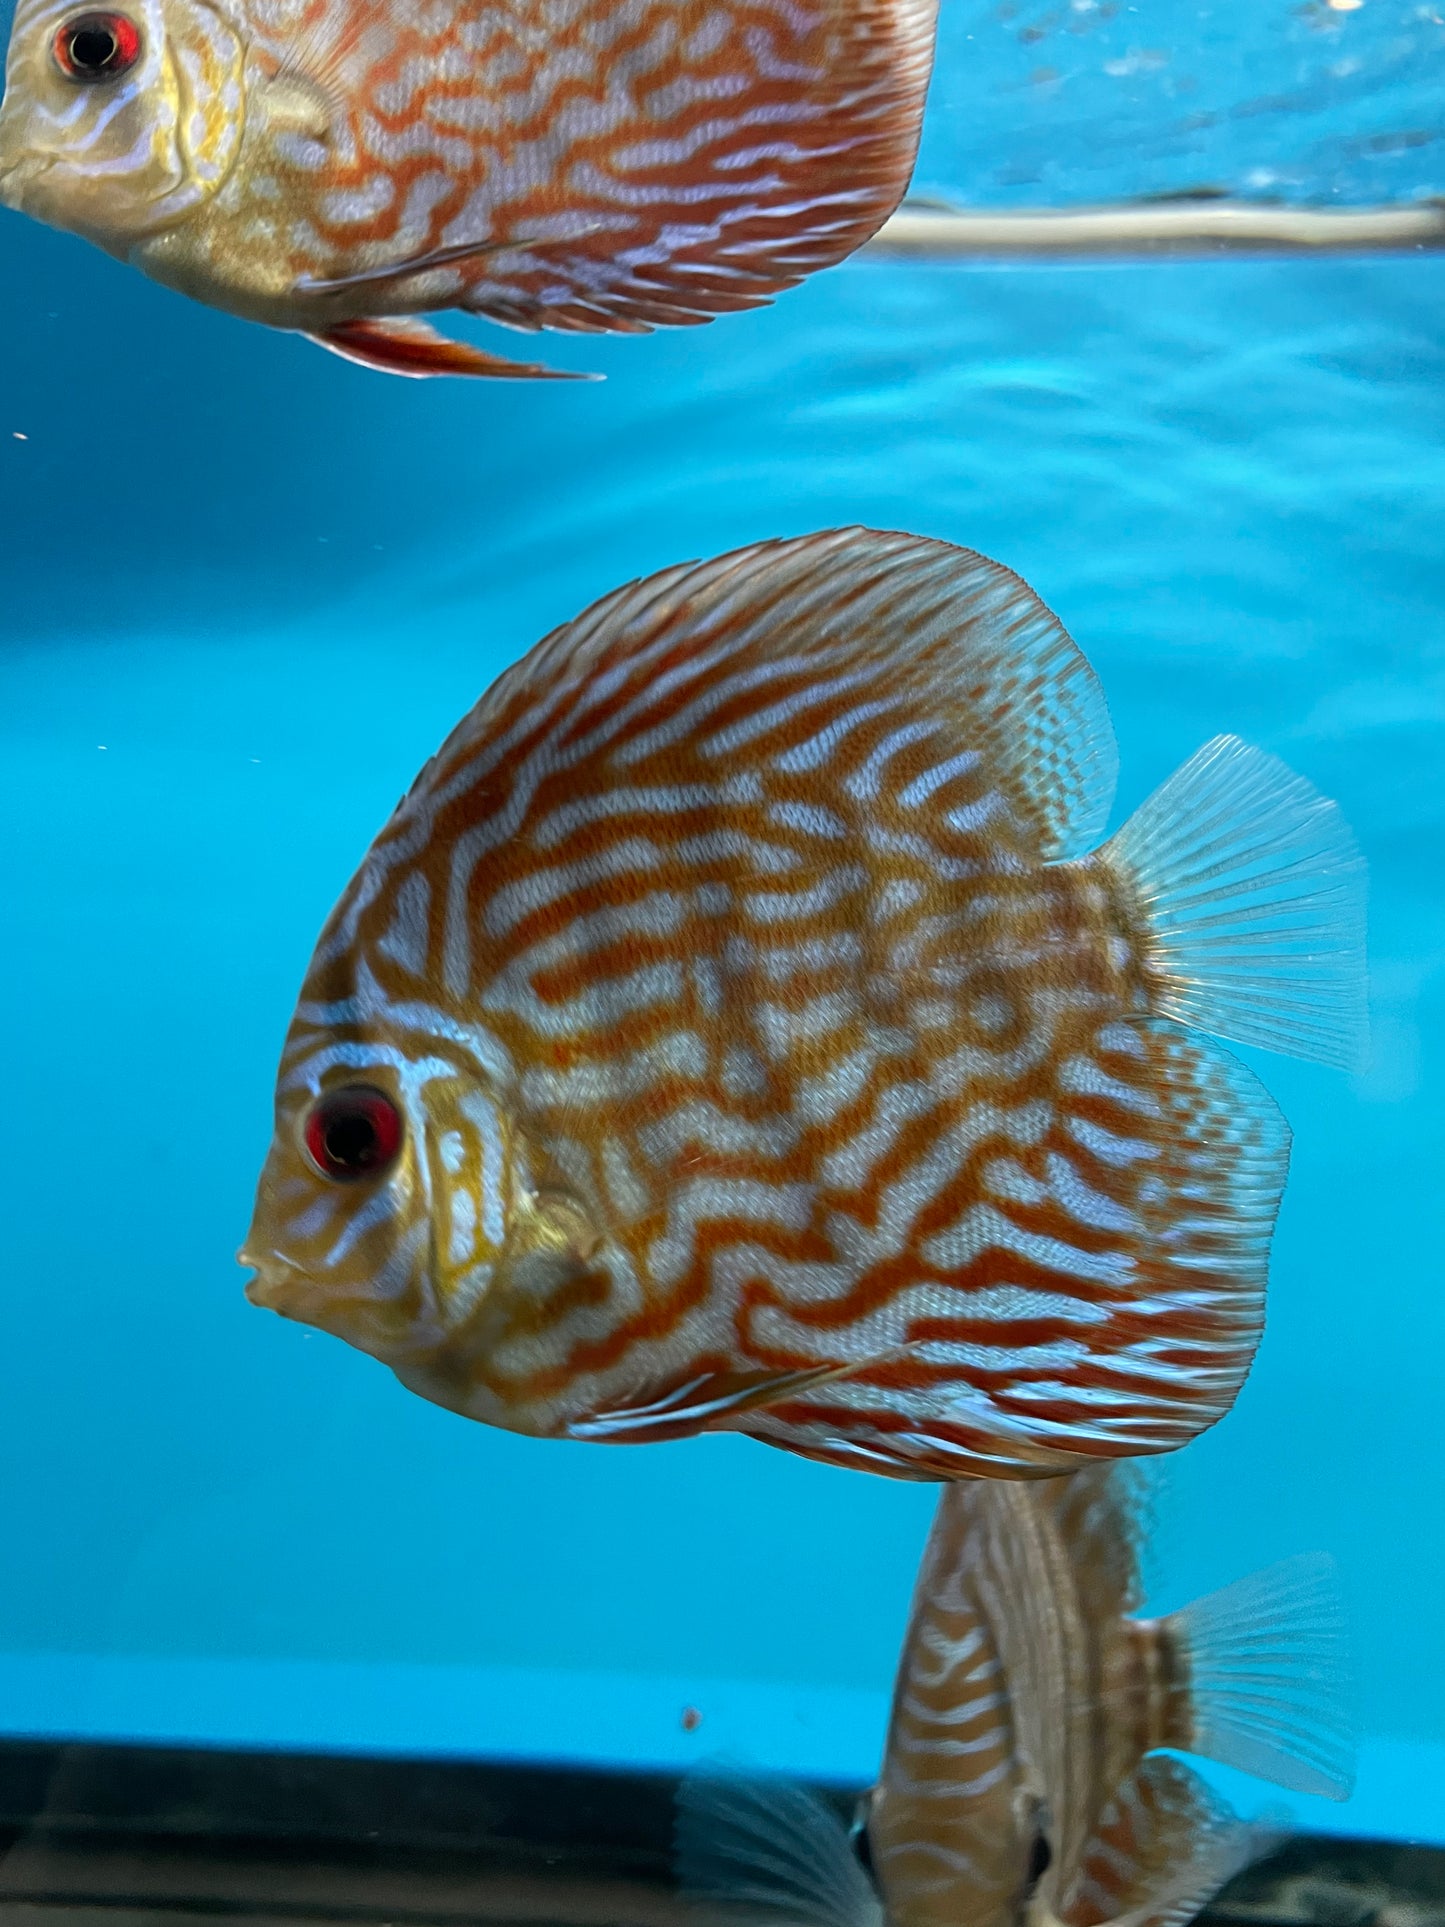 Small Red Turquoise Discus